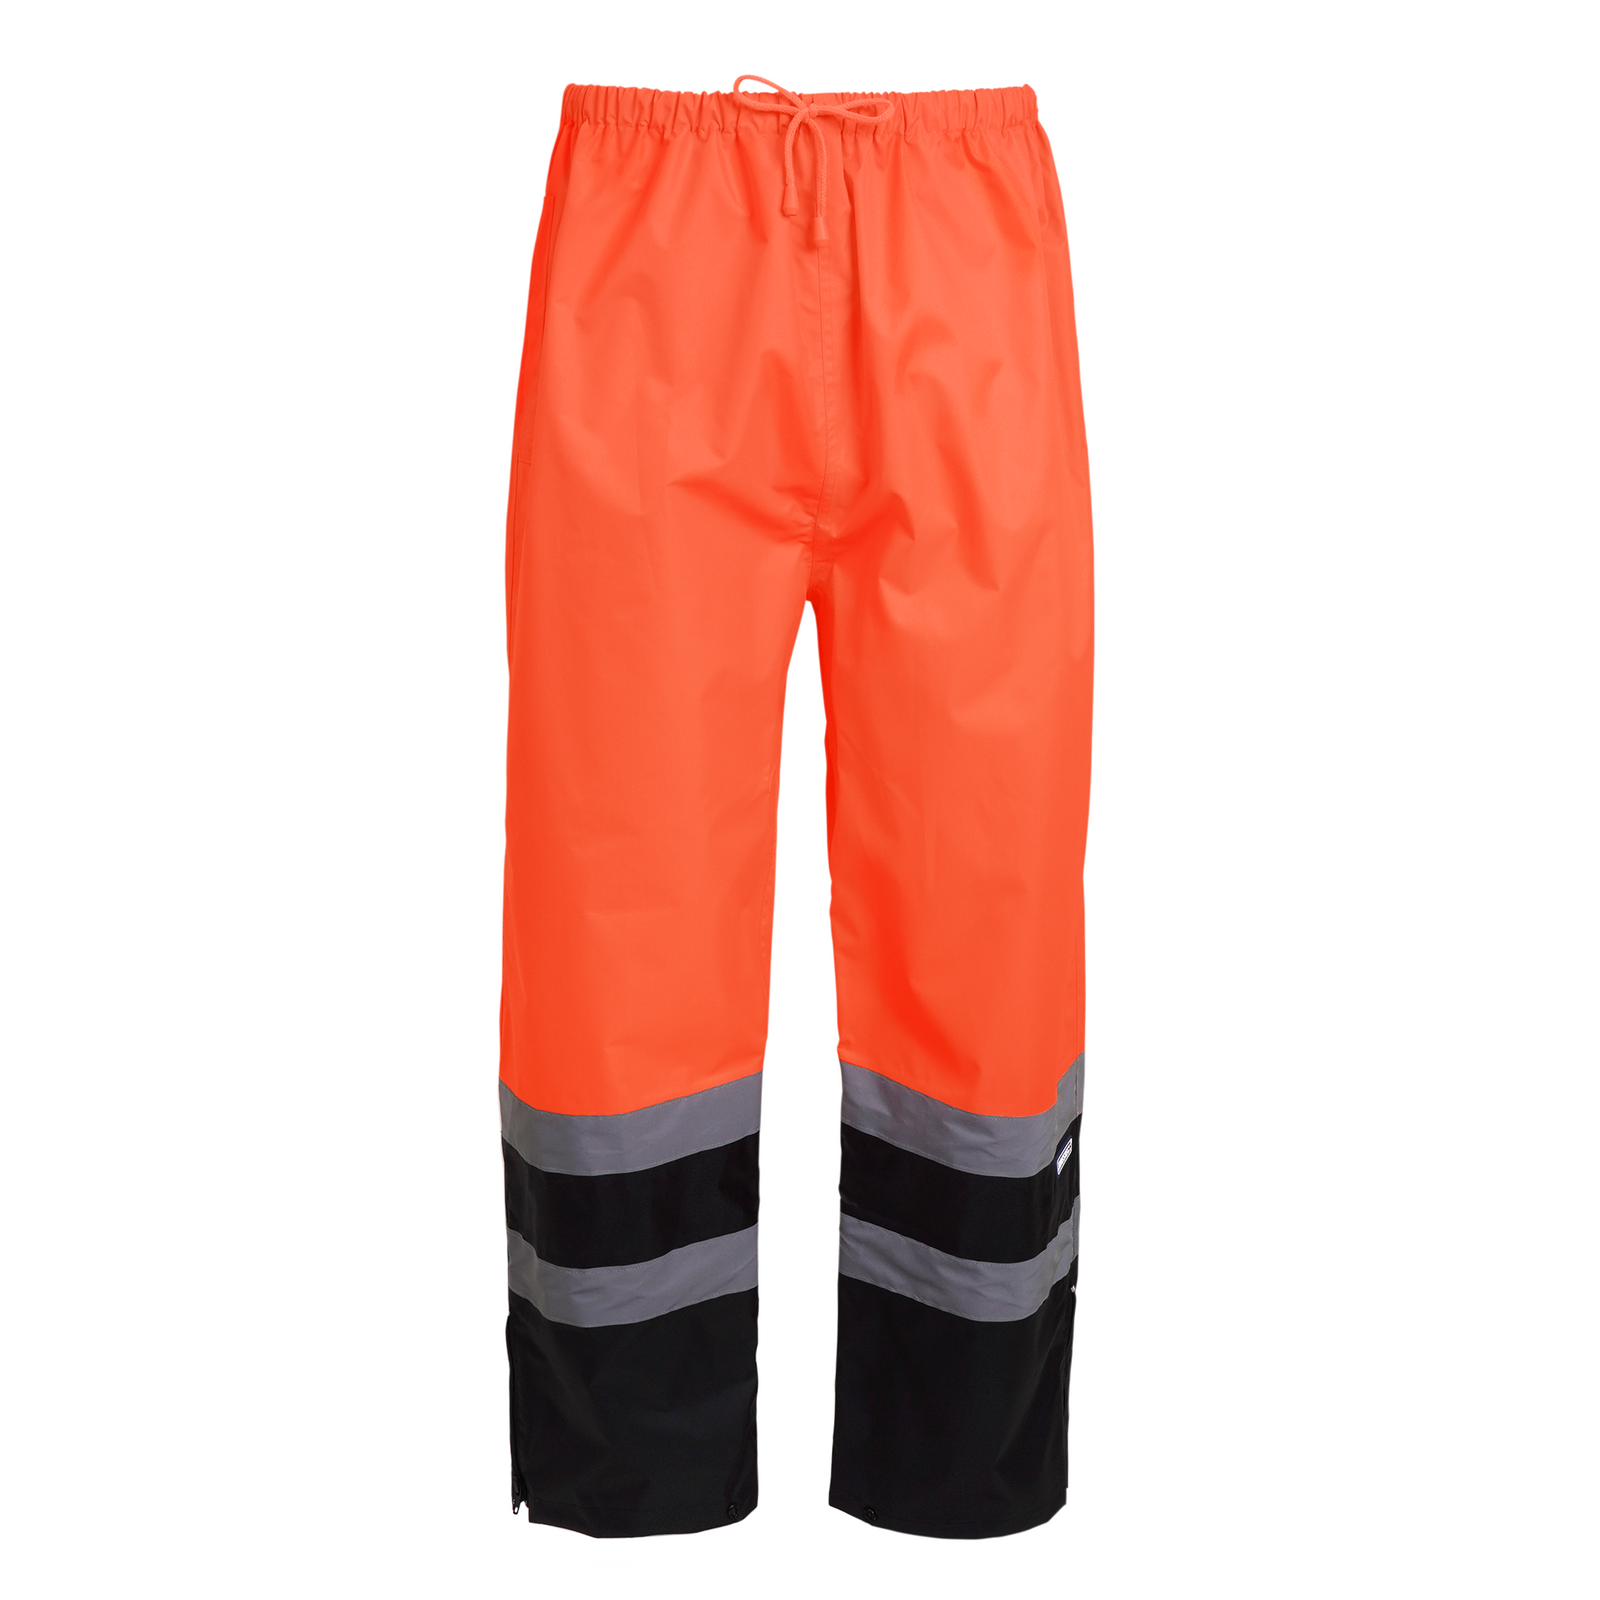 Front view of the black and orange high visibility JORESTECH rain pant with reflective strips